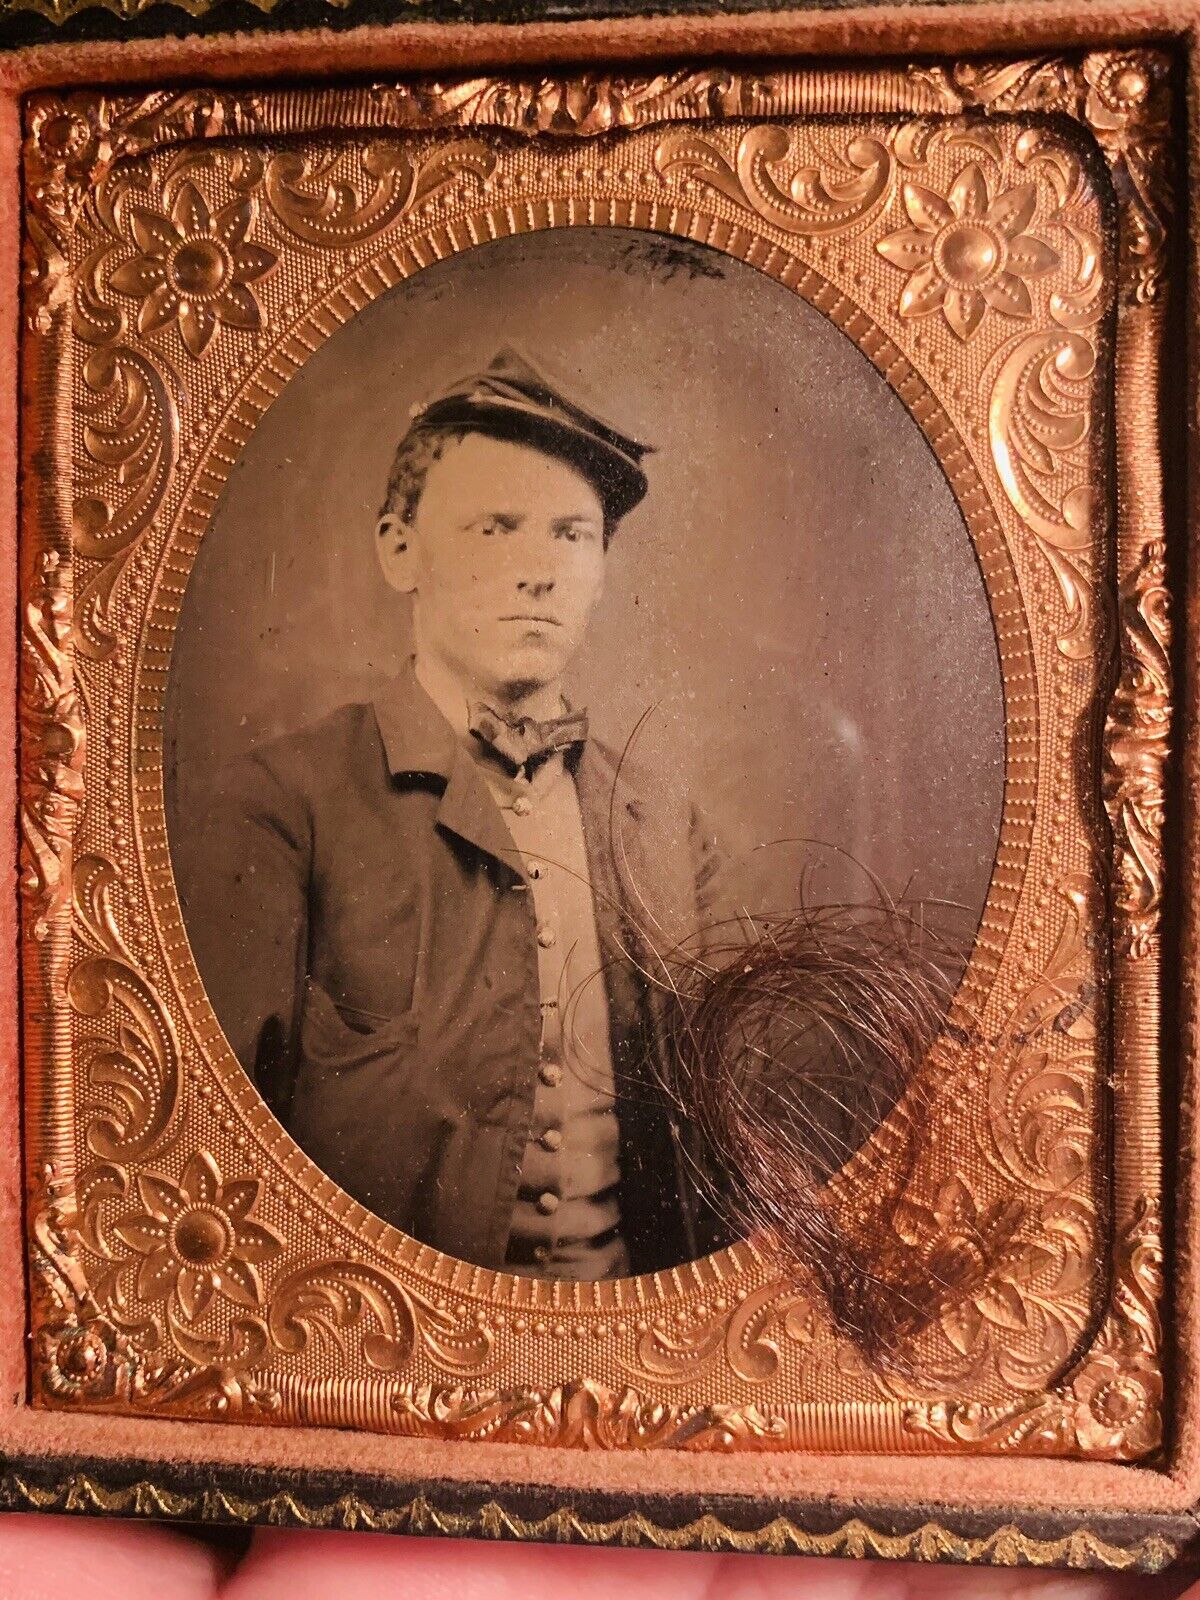 CIVIL WAR UNION SOLDIER RECRUIT 1/6 PLATE TINTYPE WITH LOCK OF HAIR MEMENTO